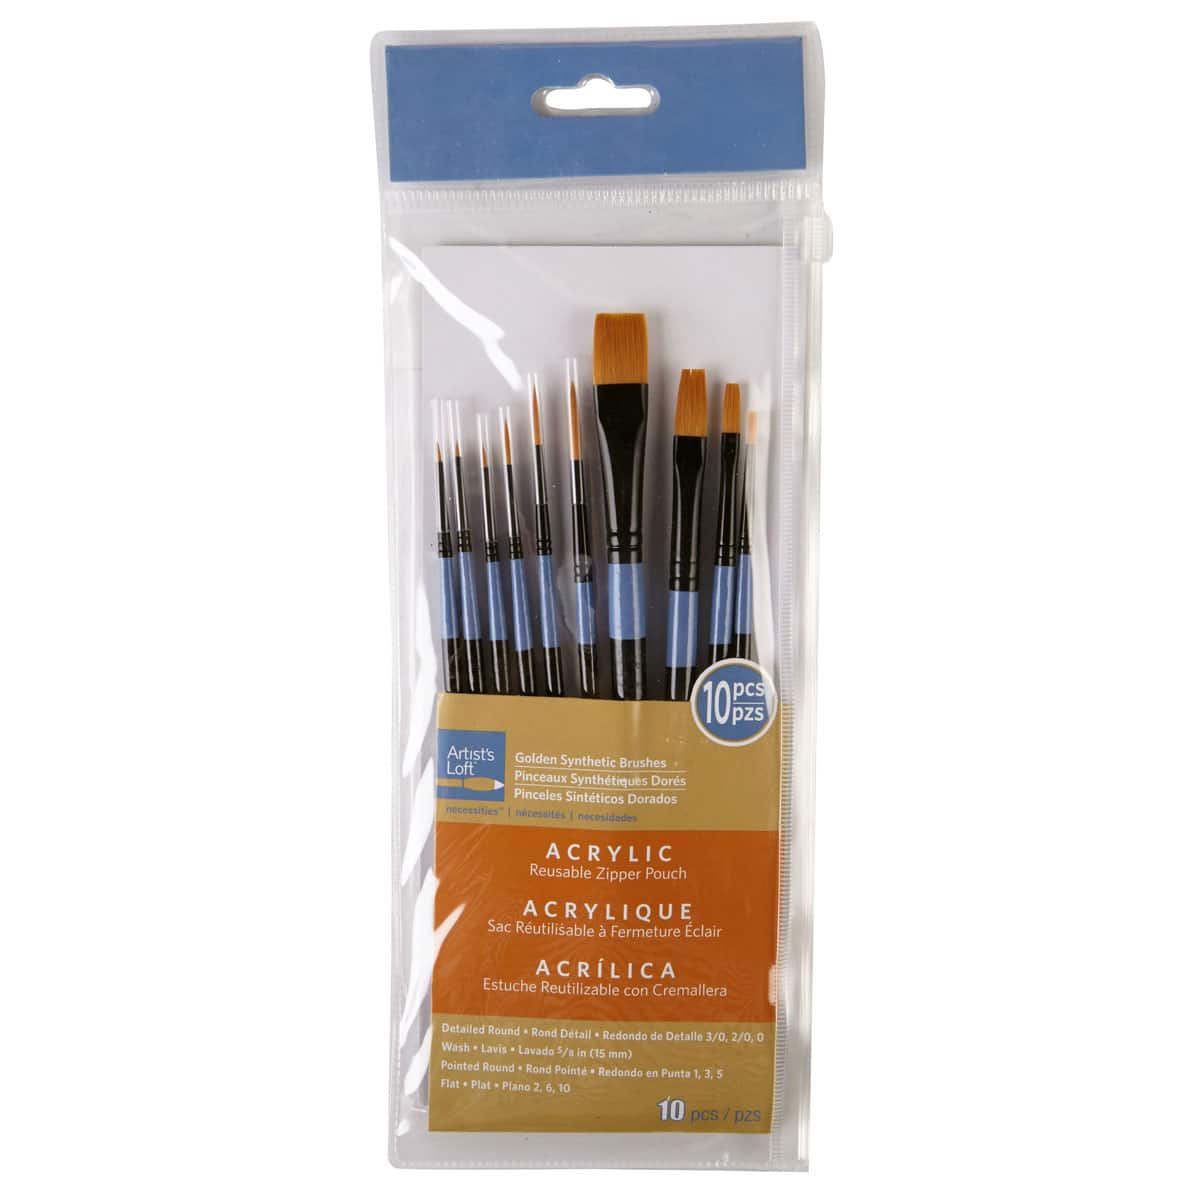 12 Packs: 10 Ct. (120 Total) Necessities Golden Synthetic Acrylic Brush Set by Artist's Loft, Size: 3.85 x 0.45 x 9.8, Black